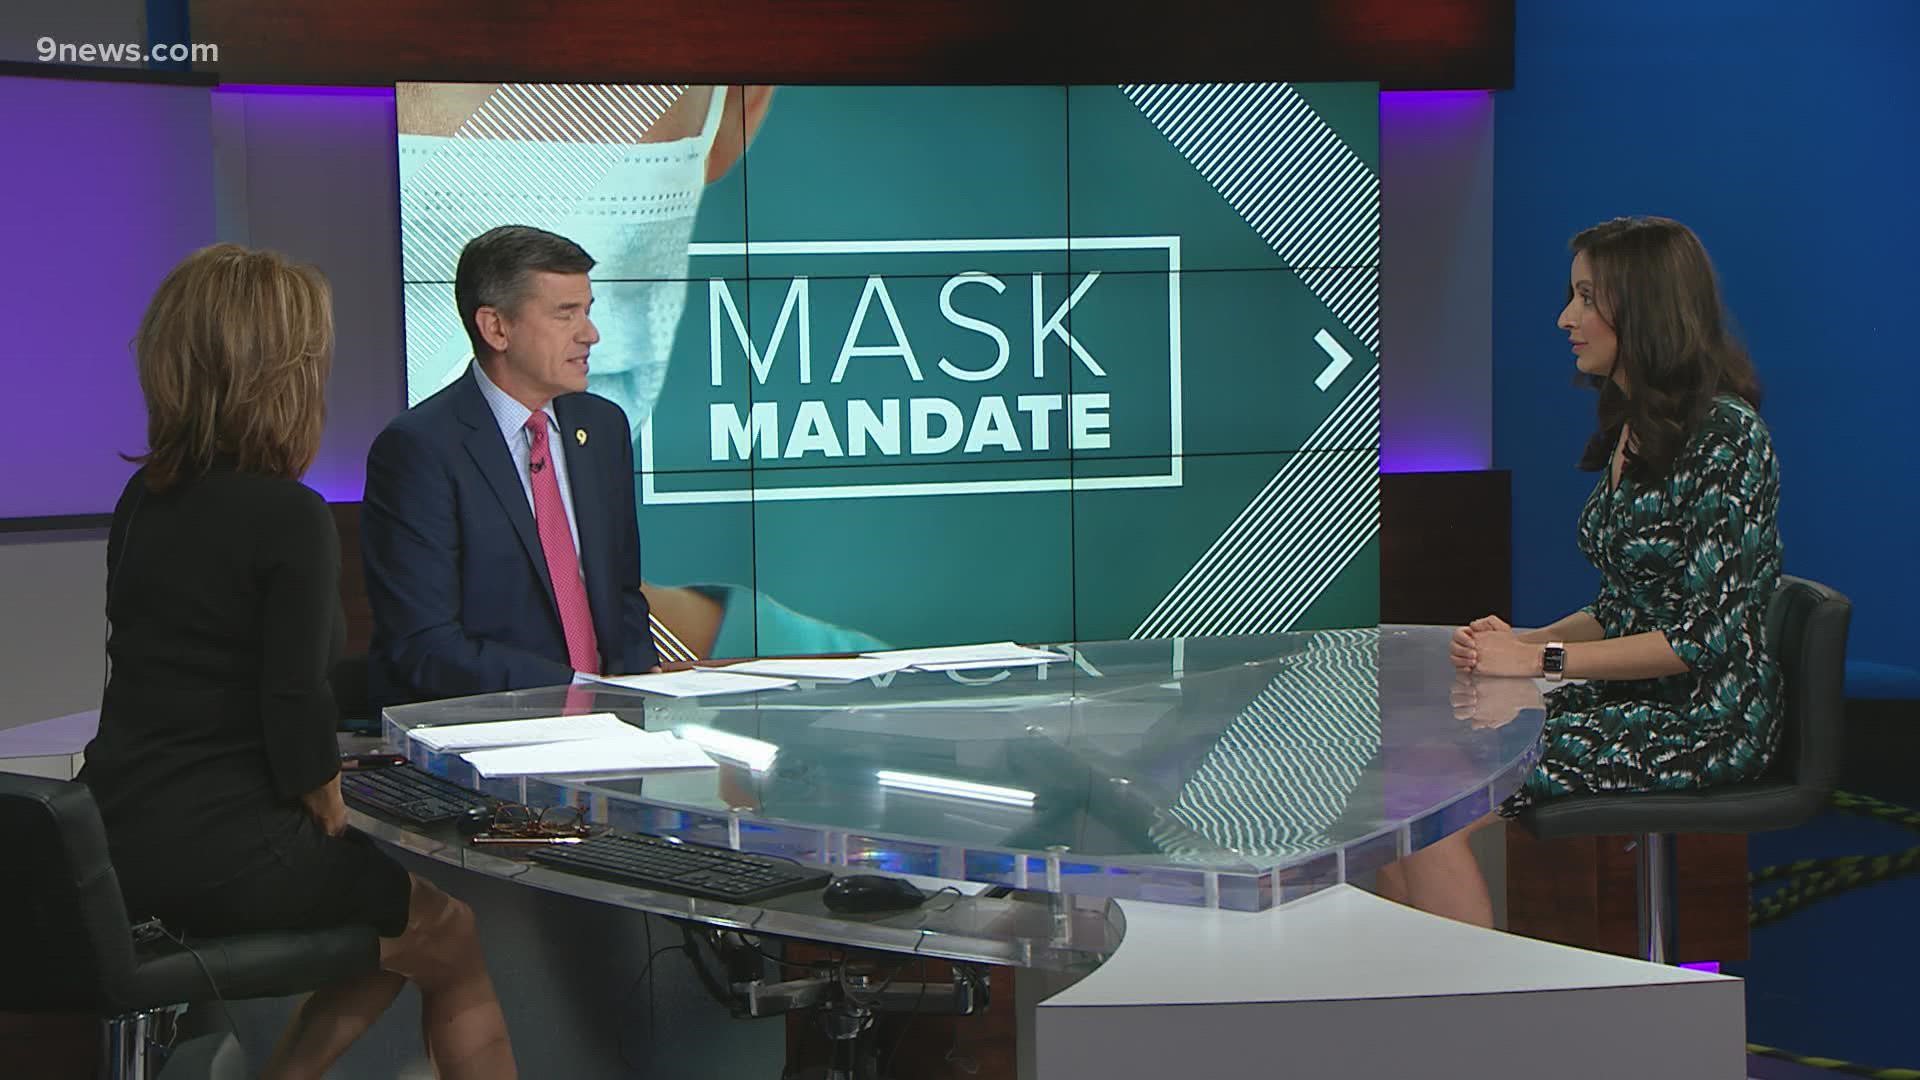 Dr. Payal Kohli talks about the recent mask mandates – masks offer an extra layer of protection, according to surveys.